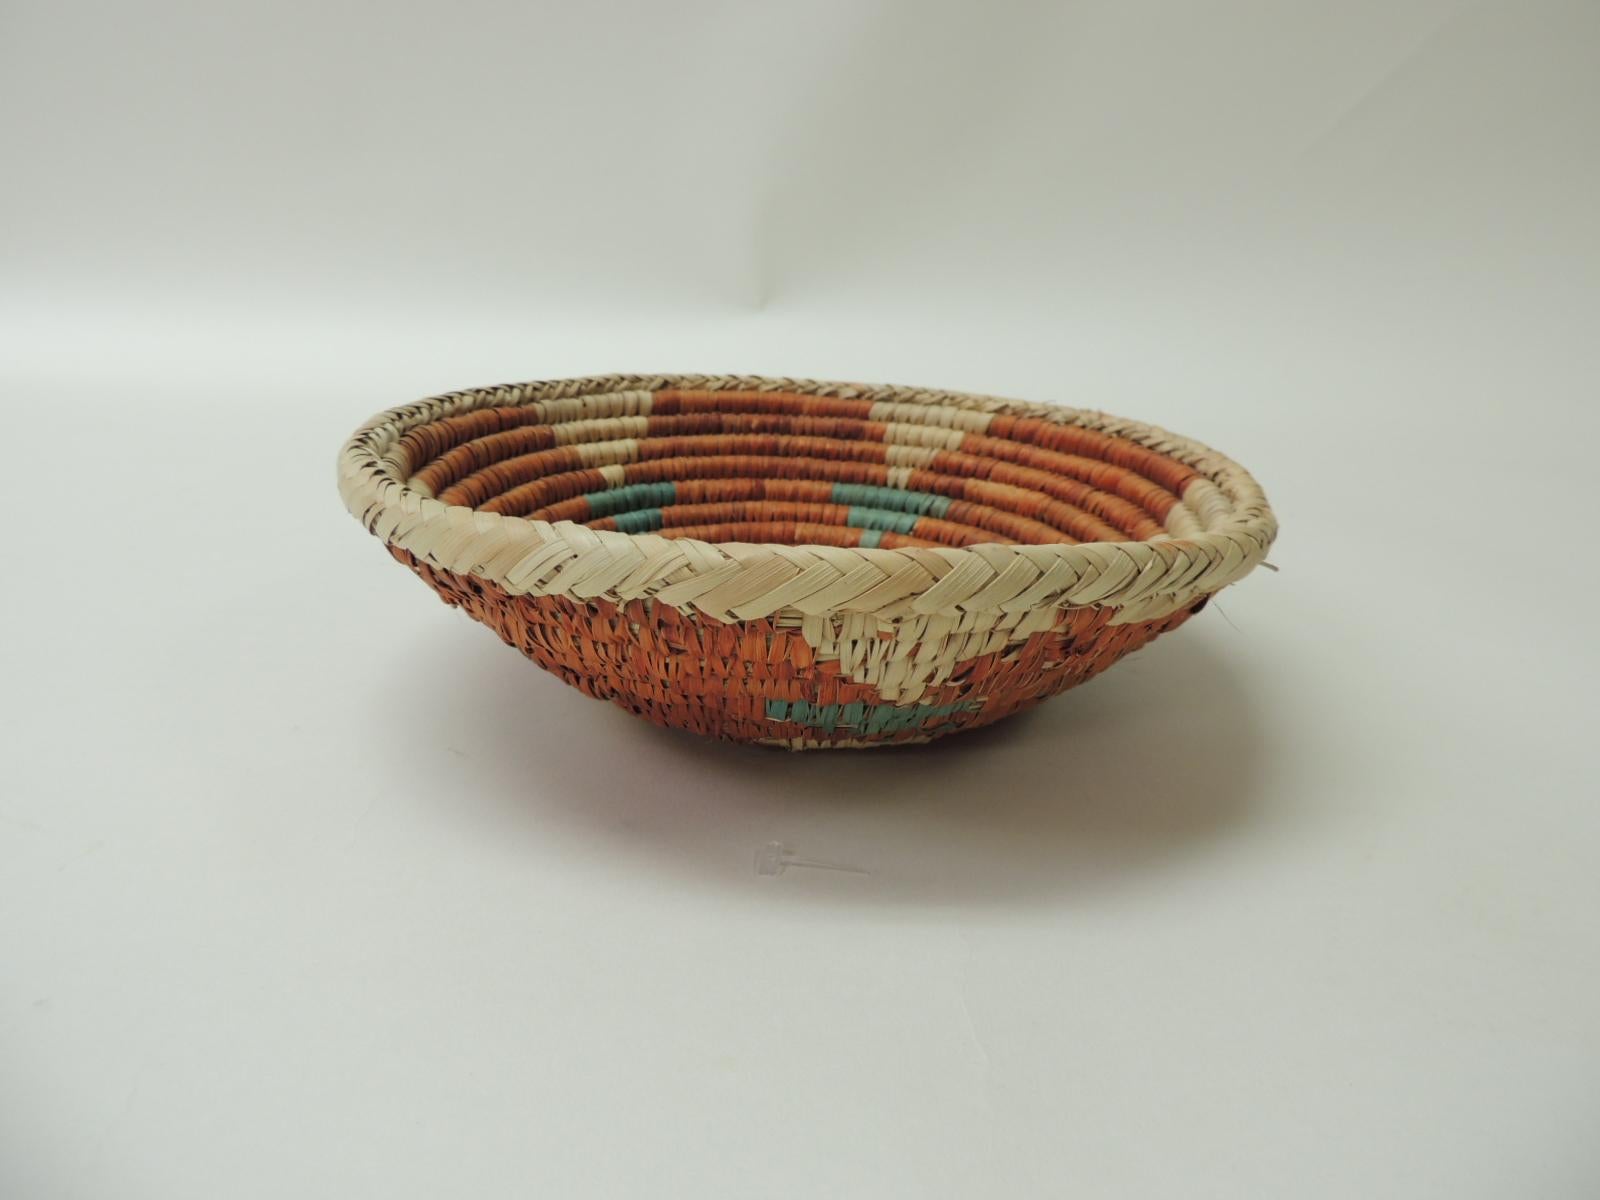 Small round tribal rustic decorative basket/bowl.
Handwoven artisanal round basket in shades of green, orange and natural.
Size: 3 H x 8.5 D.